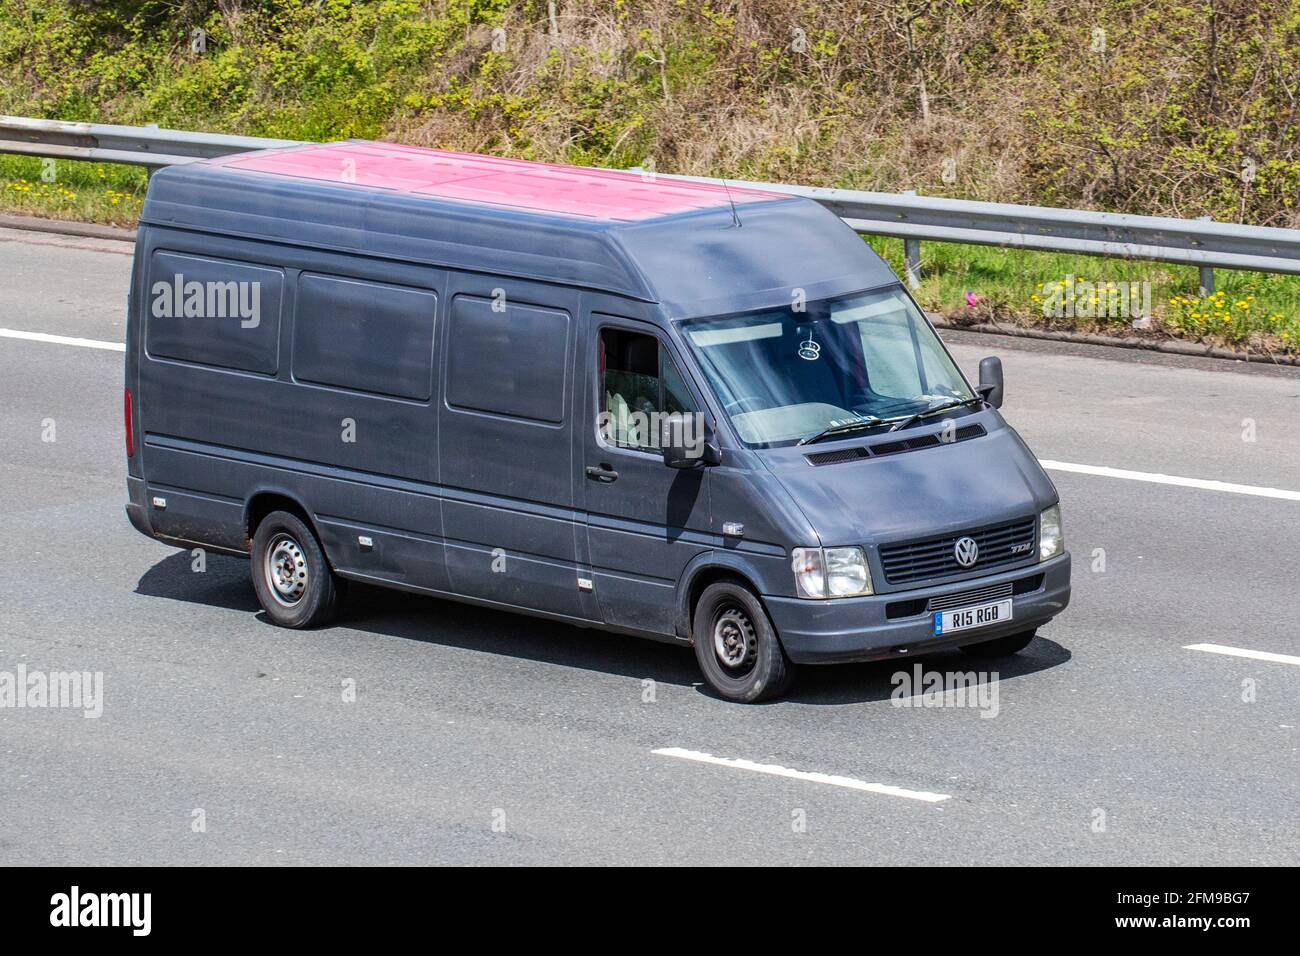 Volkswagen Lt 35 High Resolution Stock Photography and Images - Alamy